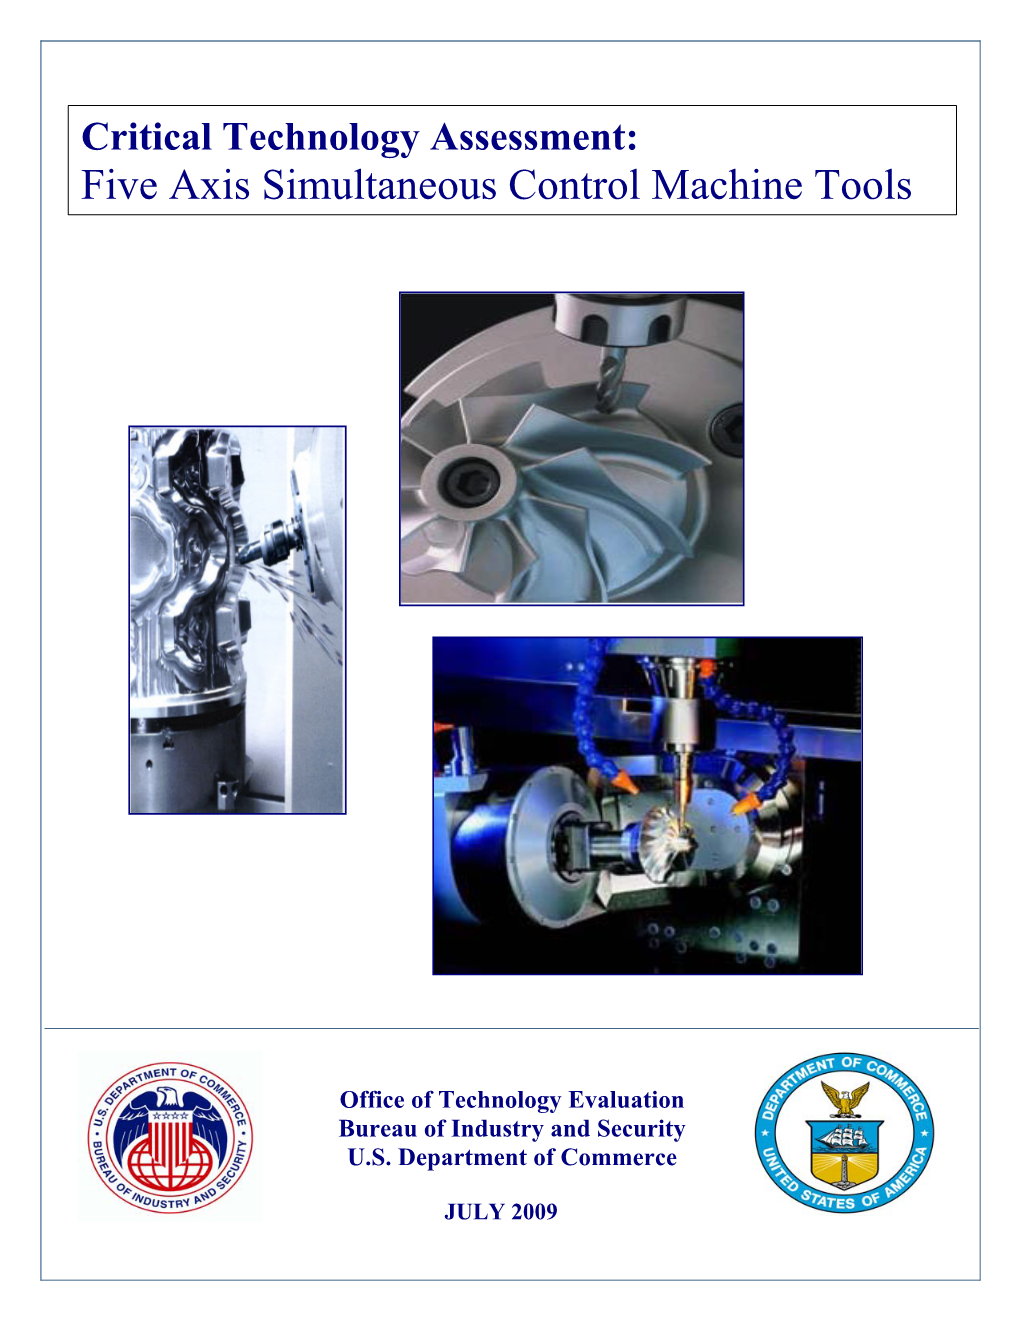 Critical Technology Assessment: Five Axis Simultaneous Control Machine Tools